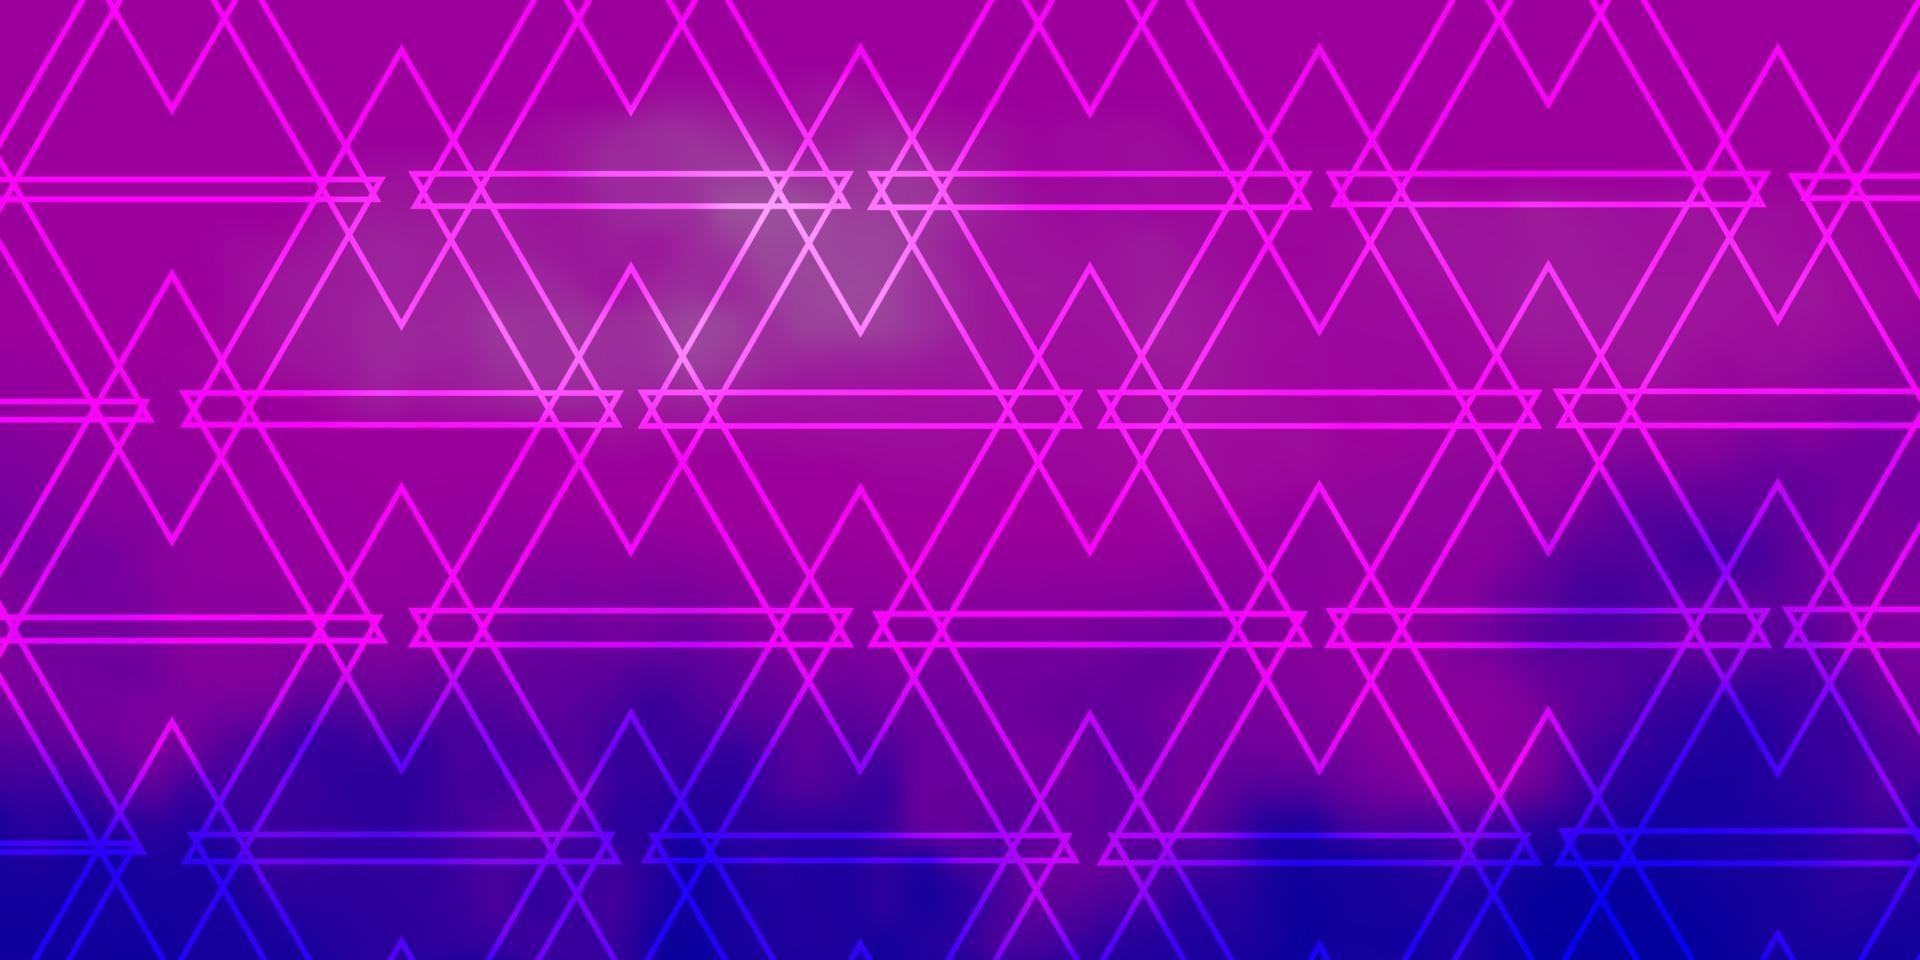 Light Pink, Blue vector background with lines, triangles.